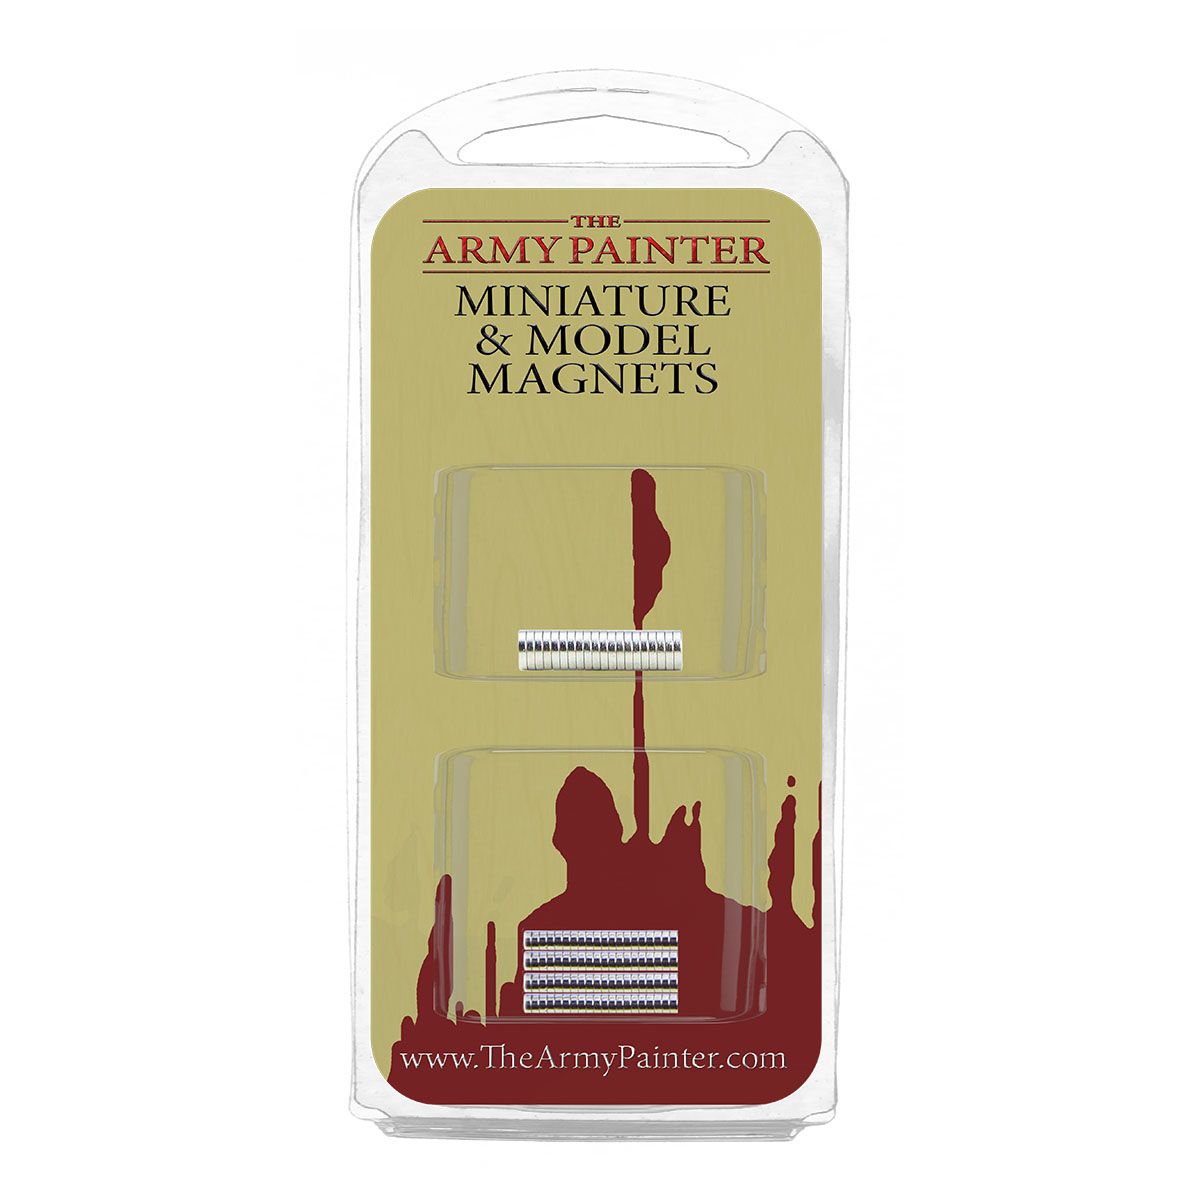 The Army Painter Tools: Miniature & Model Magnets - Bards & Cards